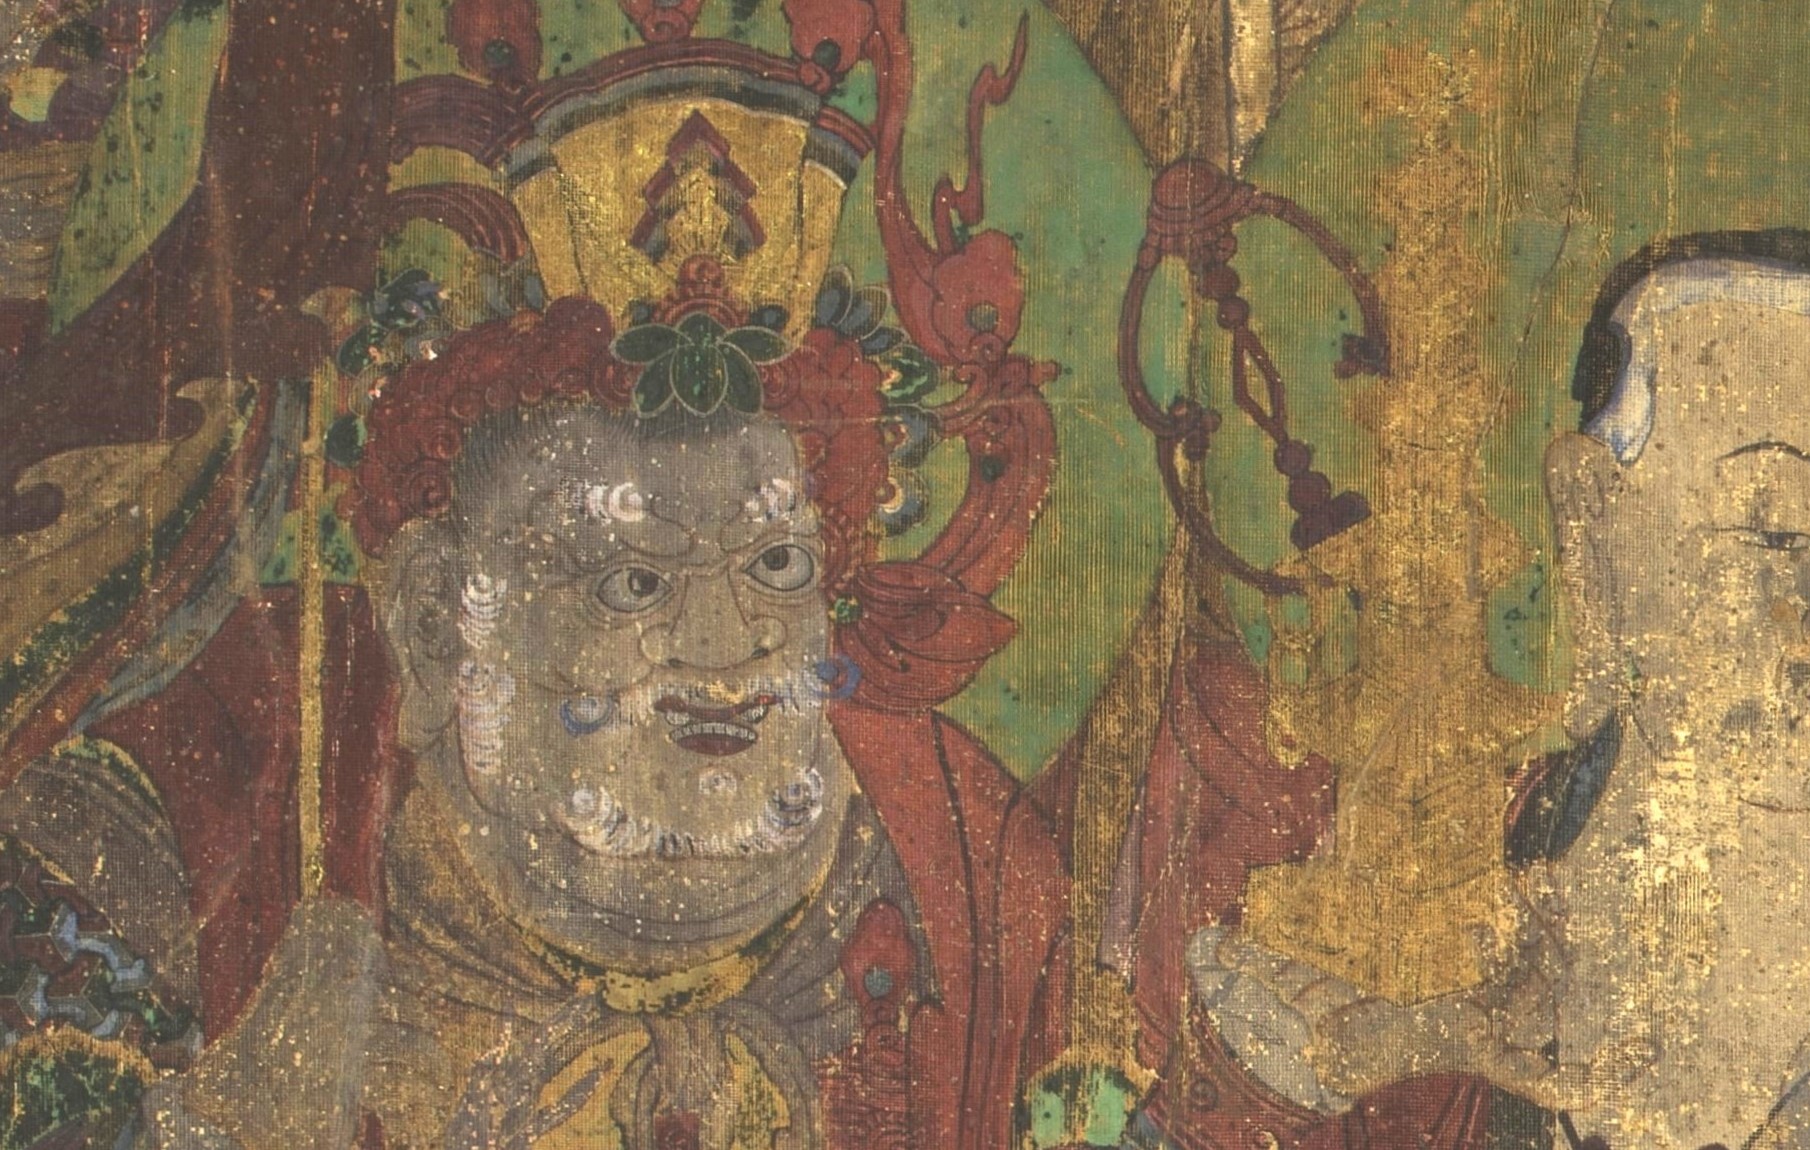 Detail showing traces of gold (possibly gold leaf) on items of Damun-cheonwang